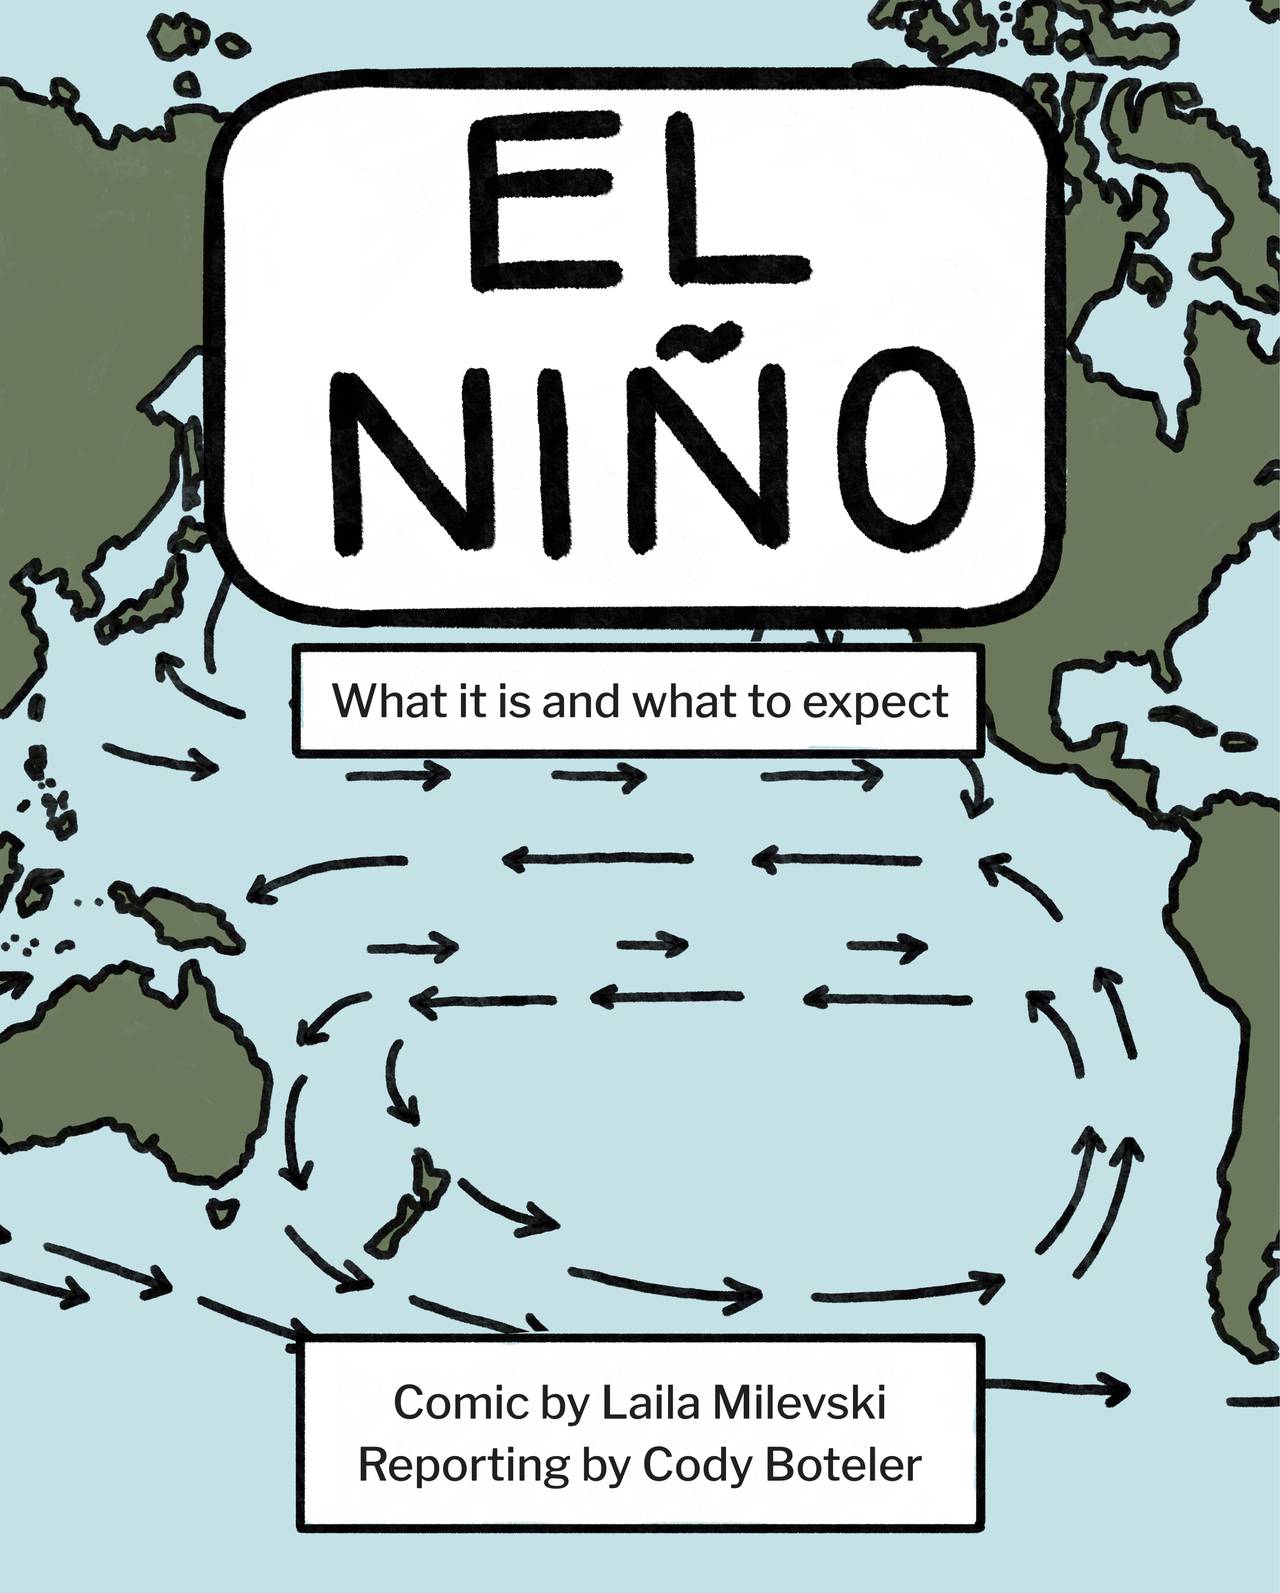 El Niño: what it is and what to expect. Comic by Laila Milevski, reporting by Cody Boteler